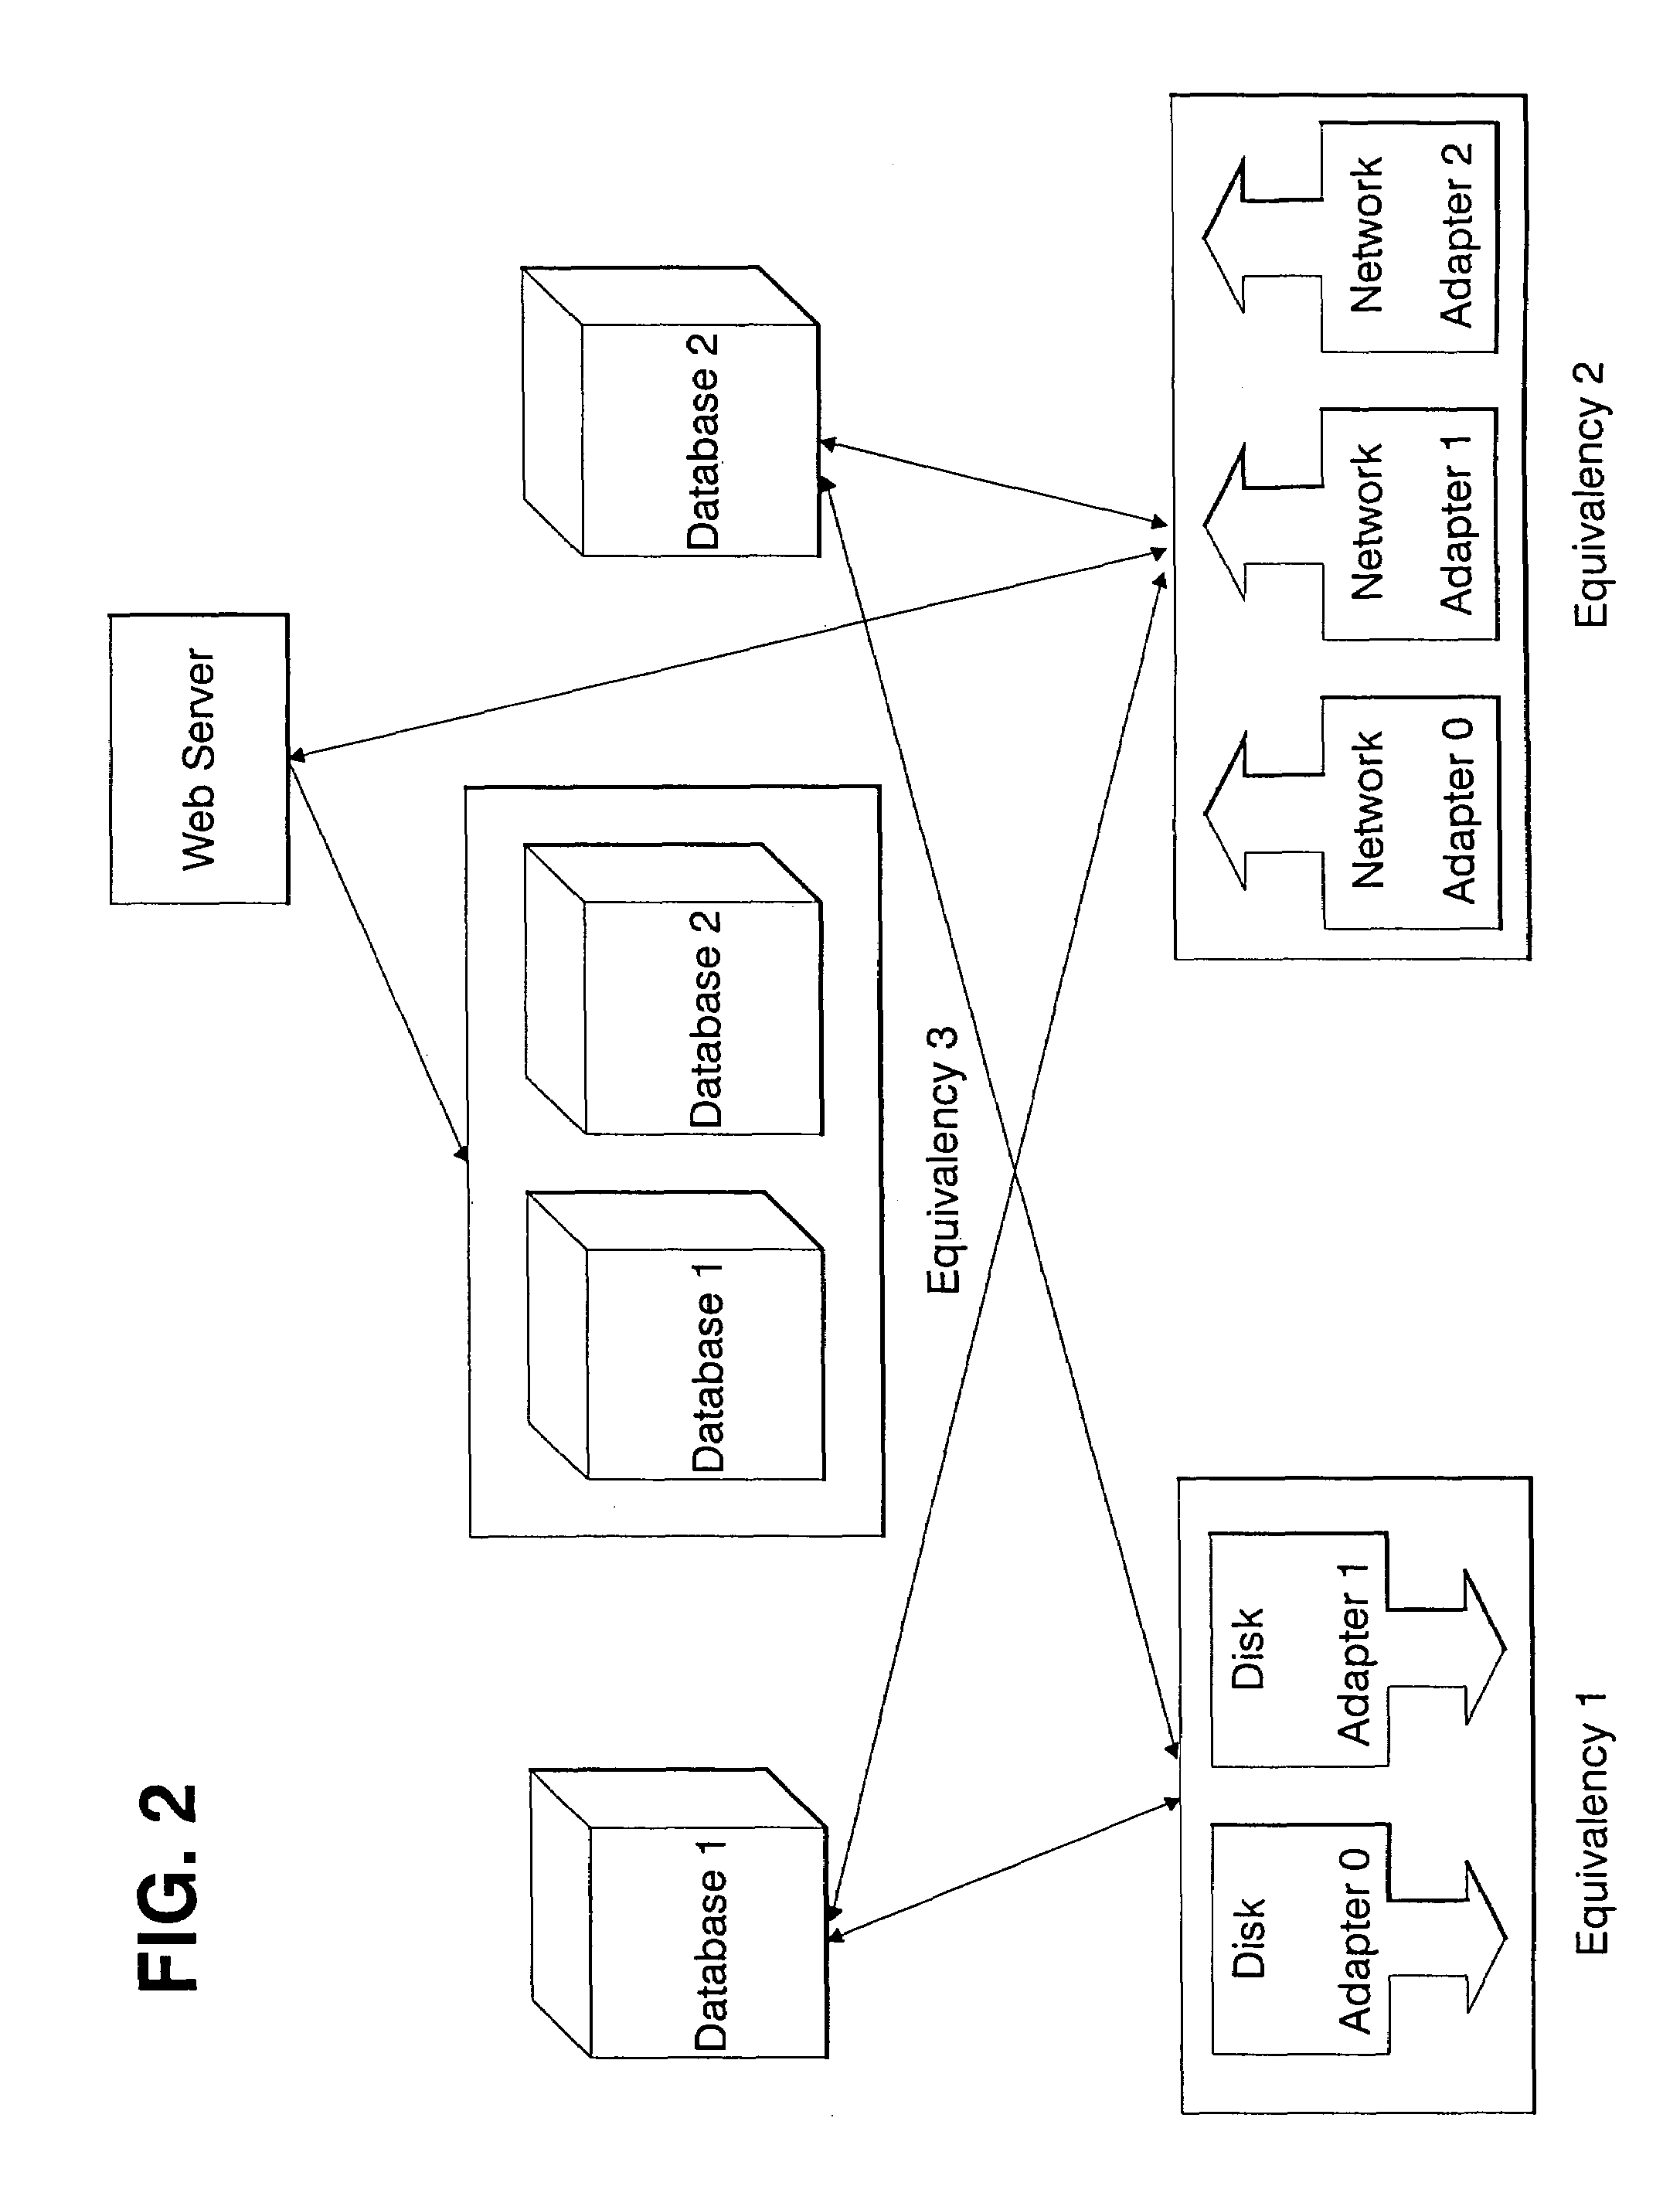 Managing a cluster of networked resources and resource groups using rule - base constraints in a scalable clustering environment